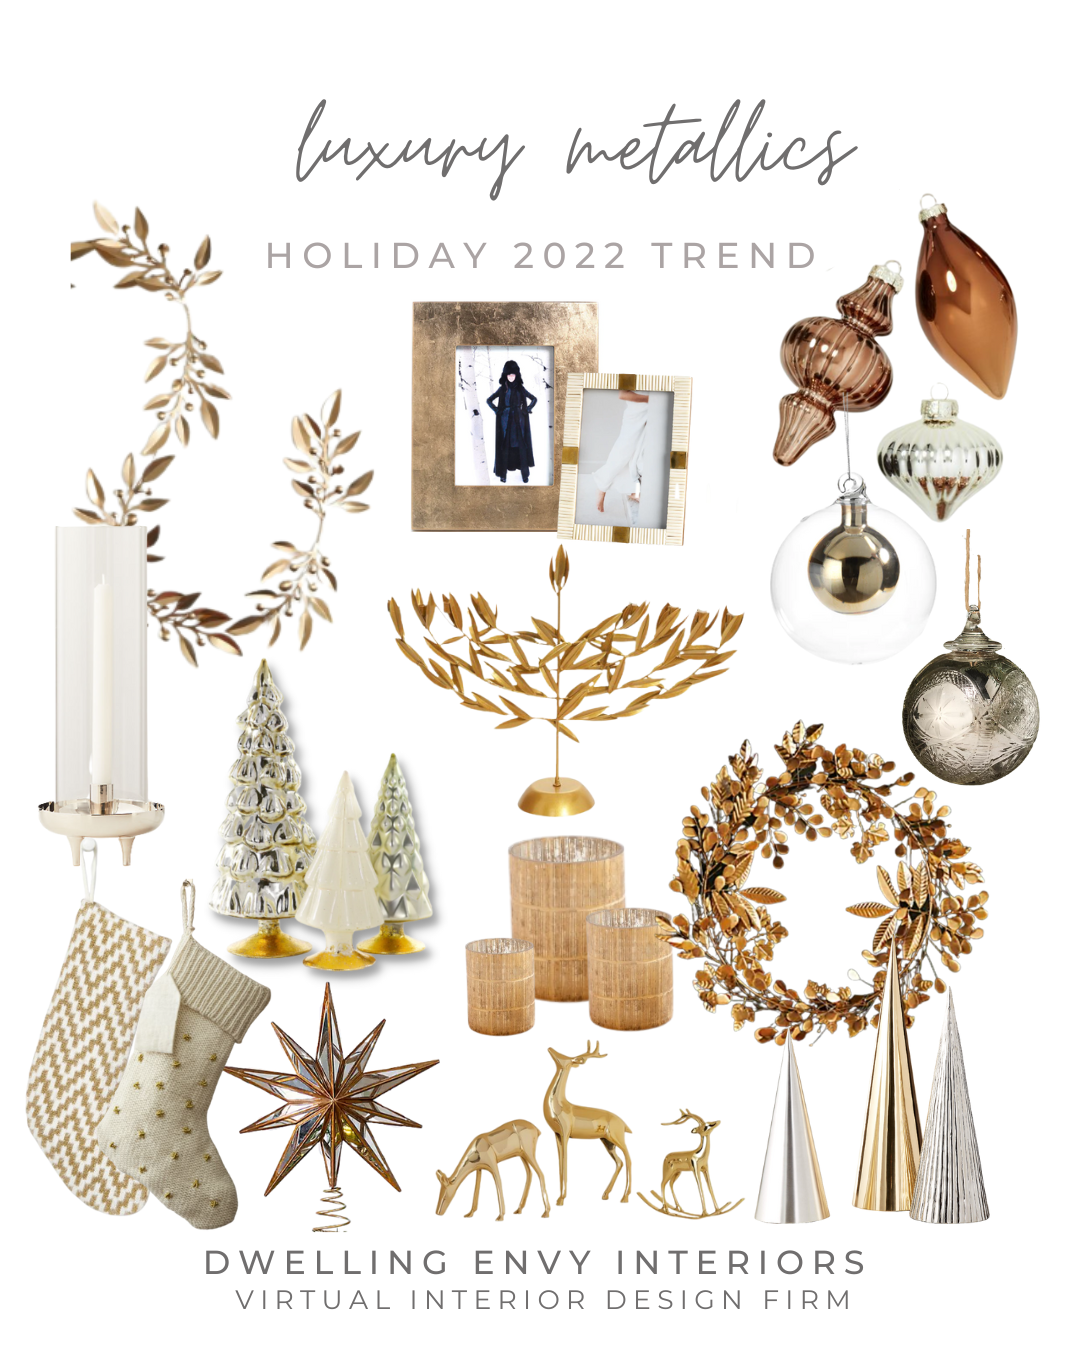 IMAGE OF DWELLING ENVY INTERIORS RECOMMENDATIONS FOR LUXURY METALLIC THEMED HOLIDAY CHRISTMAS DECOR